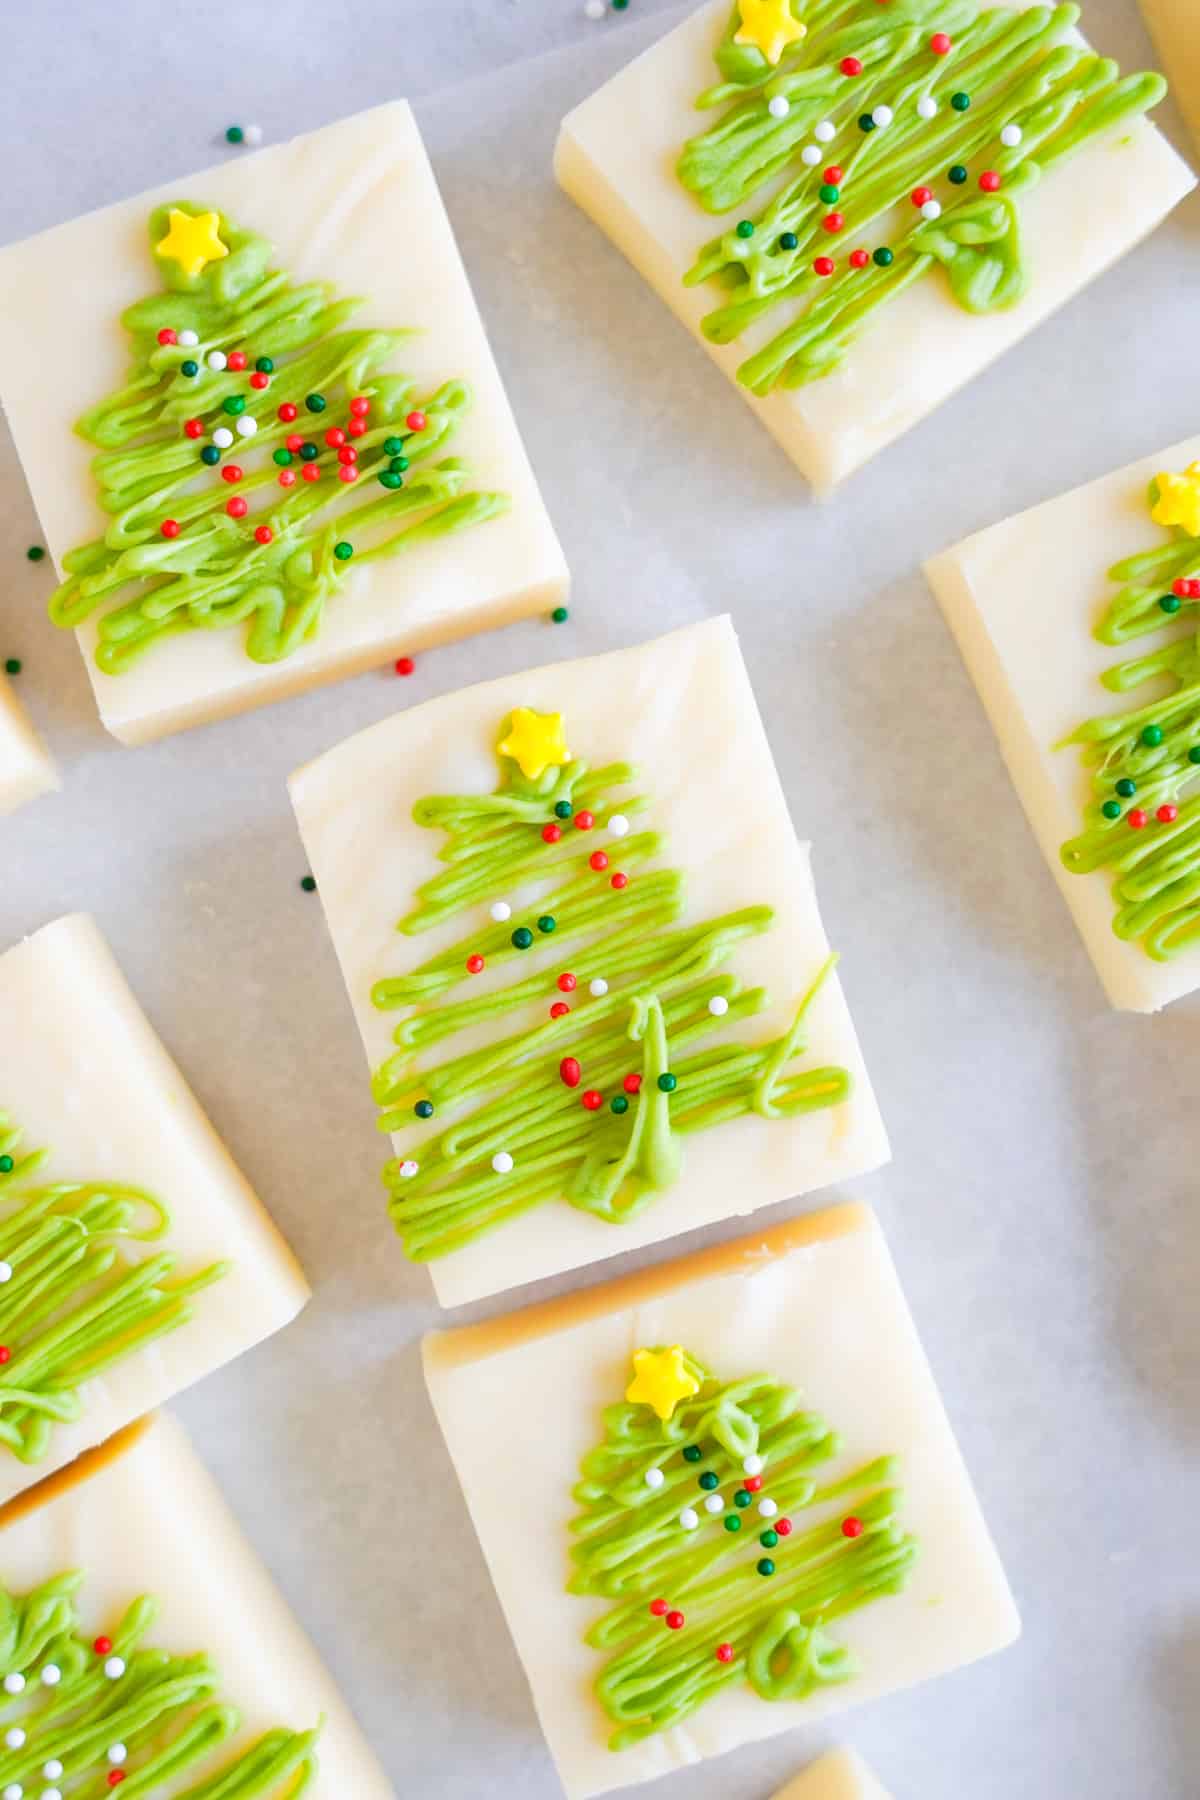 Pieces of vanilla fudge decorated with green chocolate Christmas trees and sprinkles.